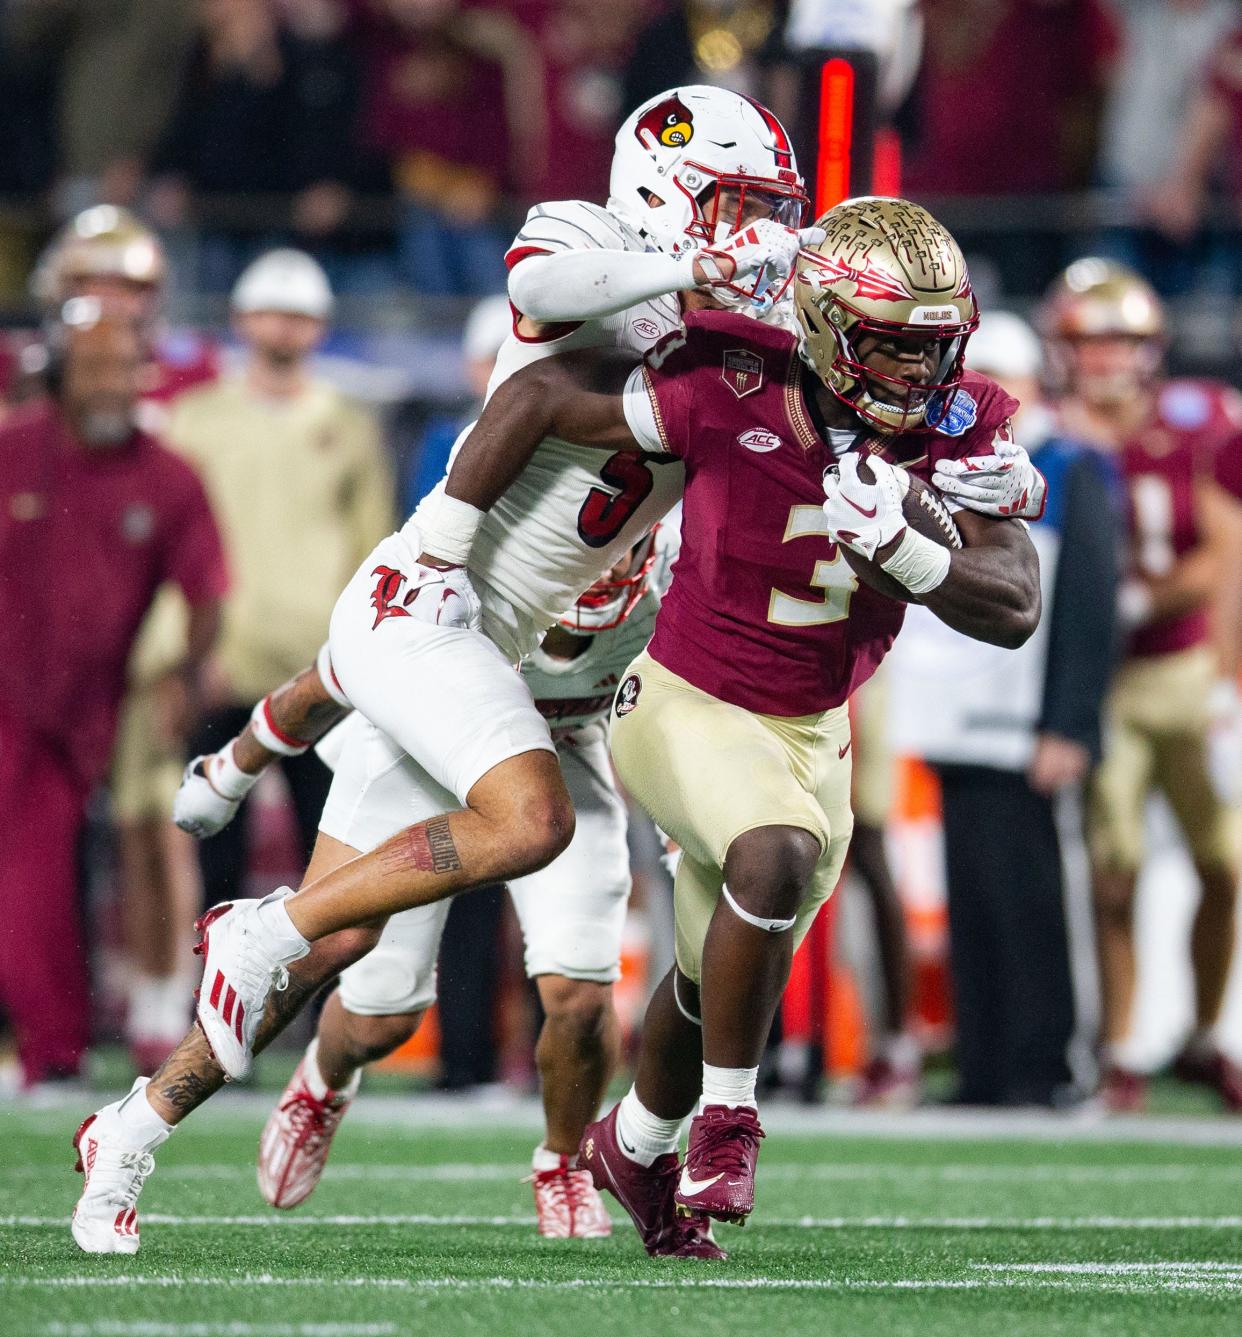 Florida State Seminoles running back Trey Benson (3) makes his way down the field. The Florida State Seminoles defeated the Louisville Cardinals 16-6 to claim the ACC Championship title in Charlotte, North Carolina on Saturday, Dec. 2, 2023.